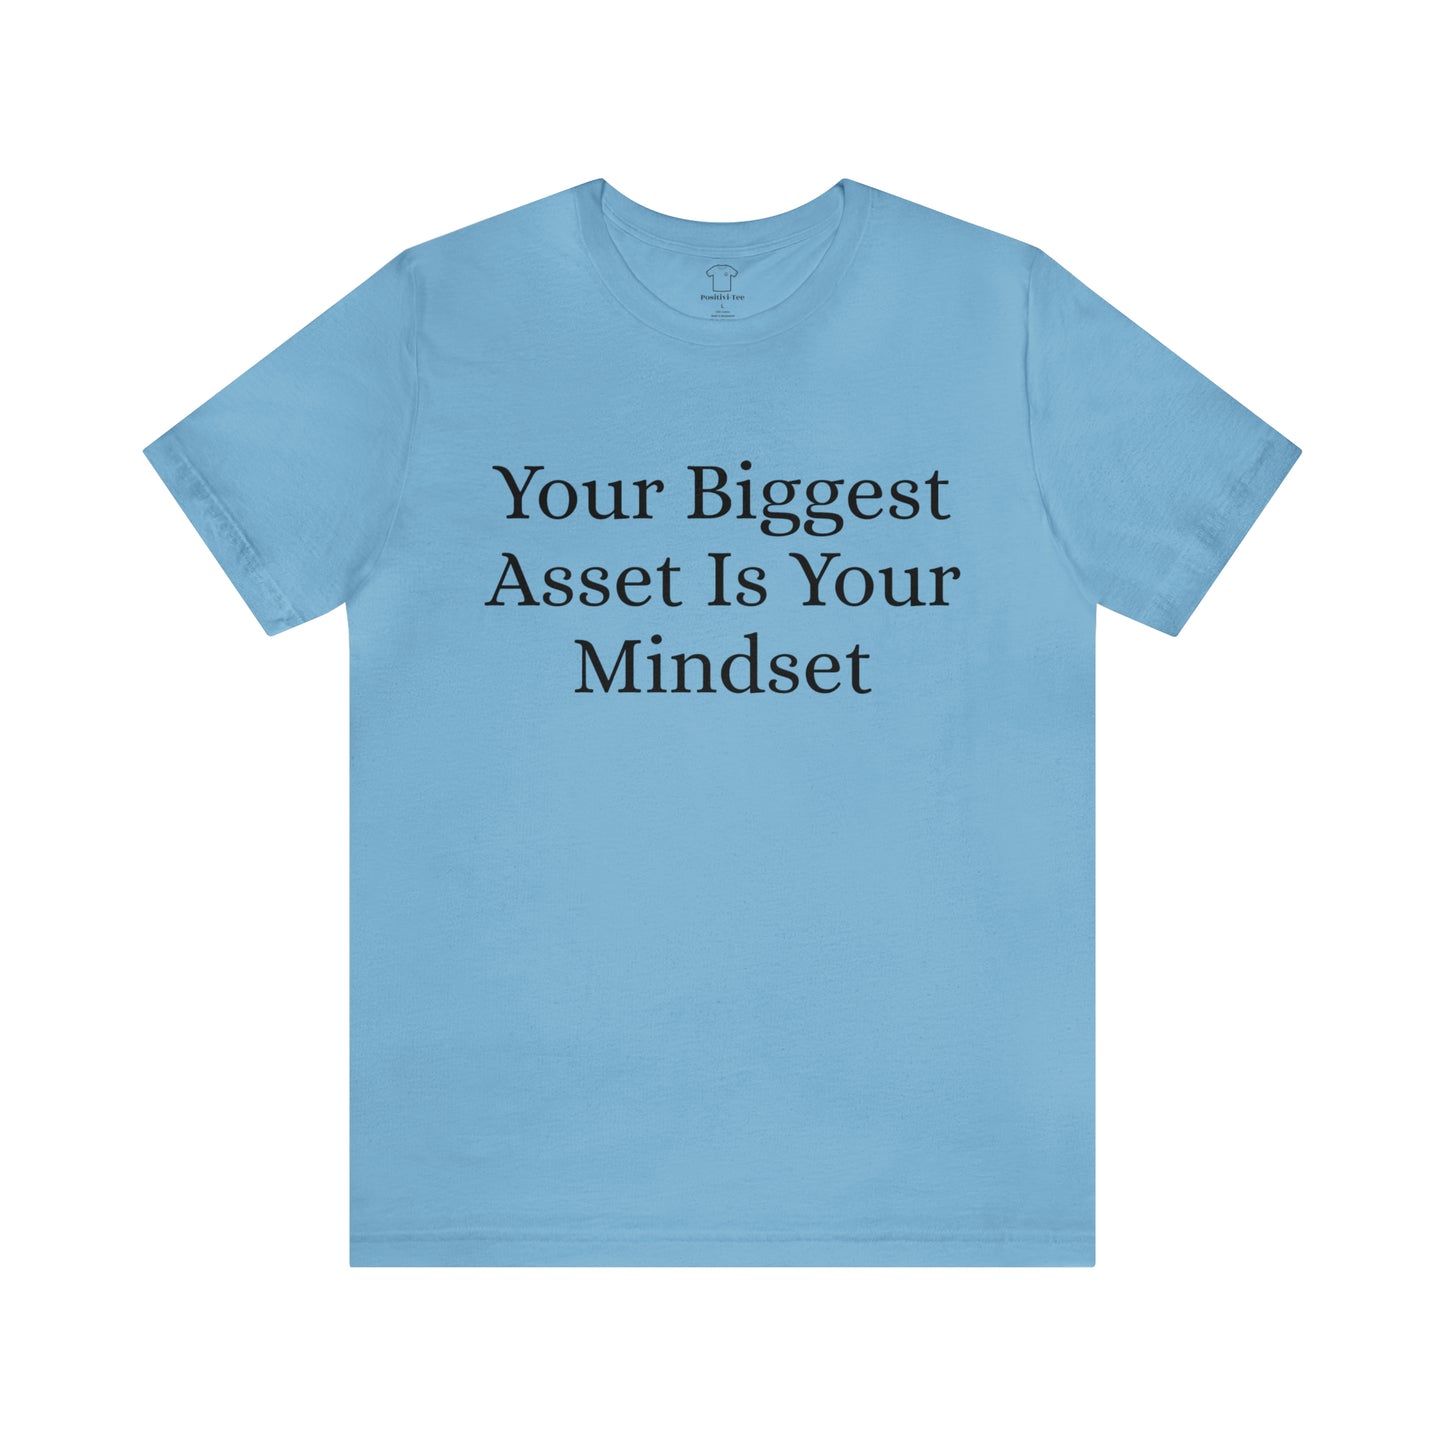 Your Biggest Asset Is Your Mindset